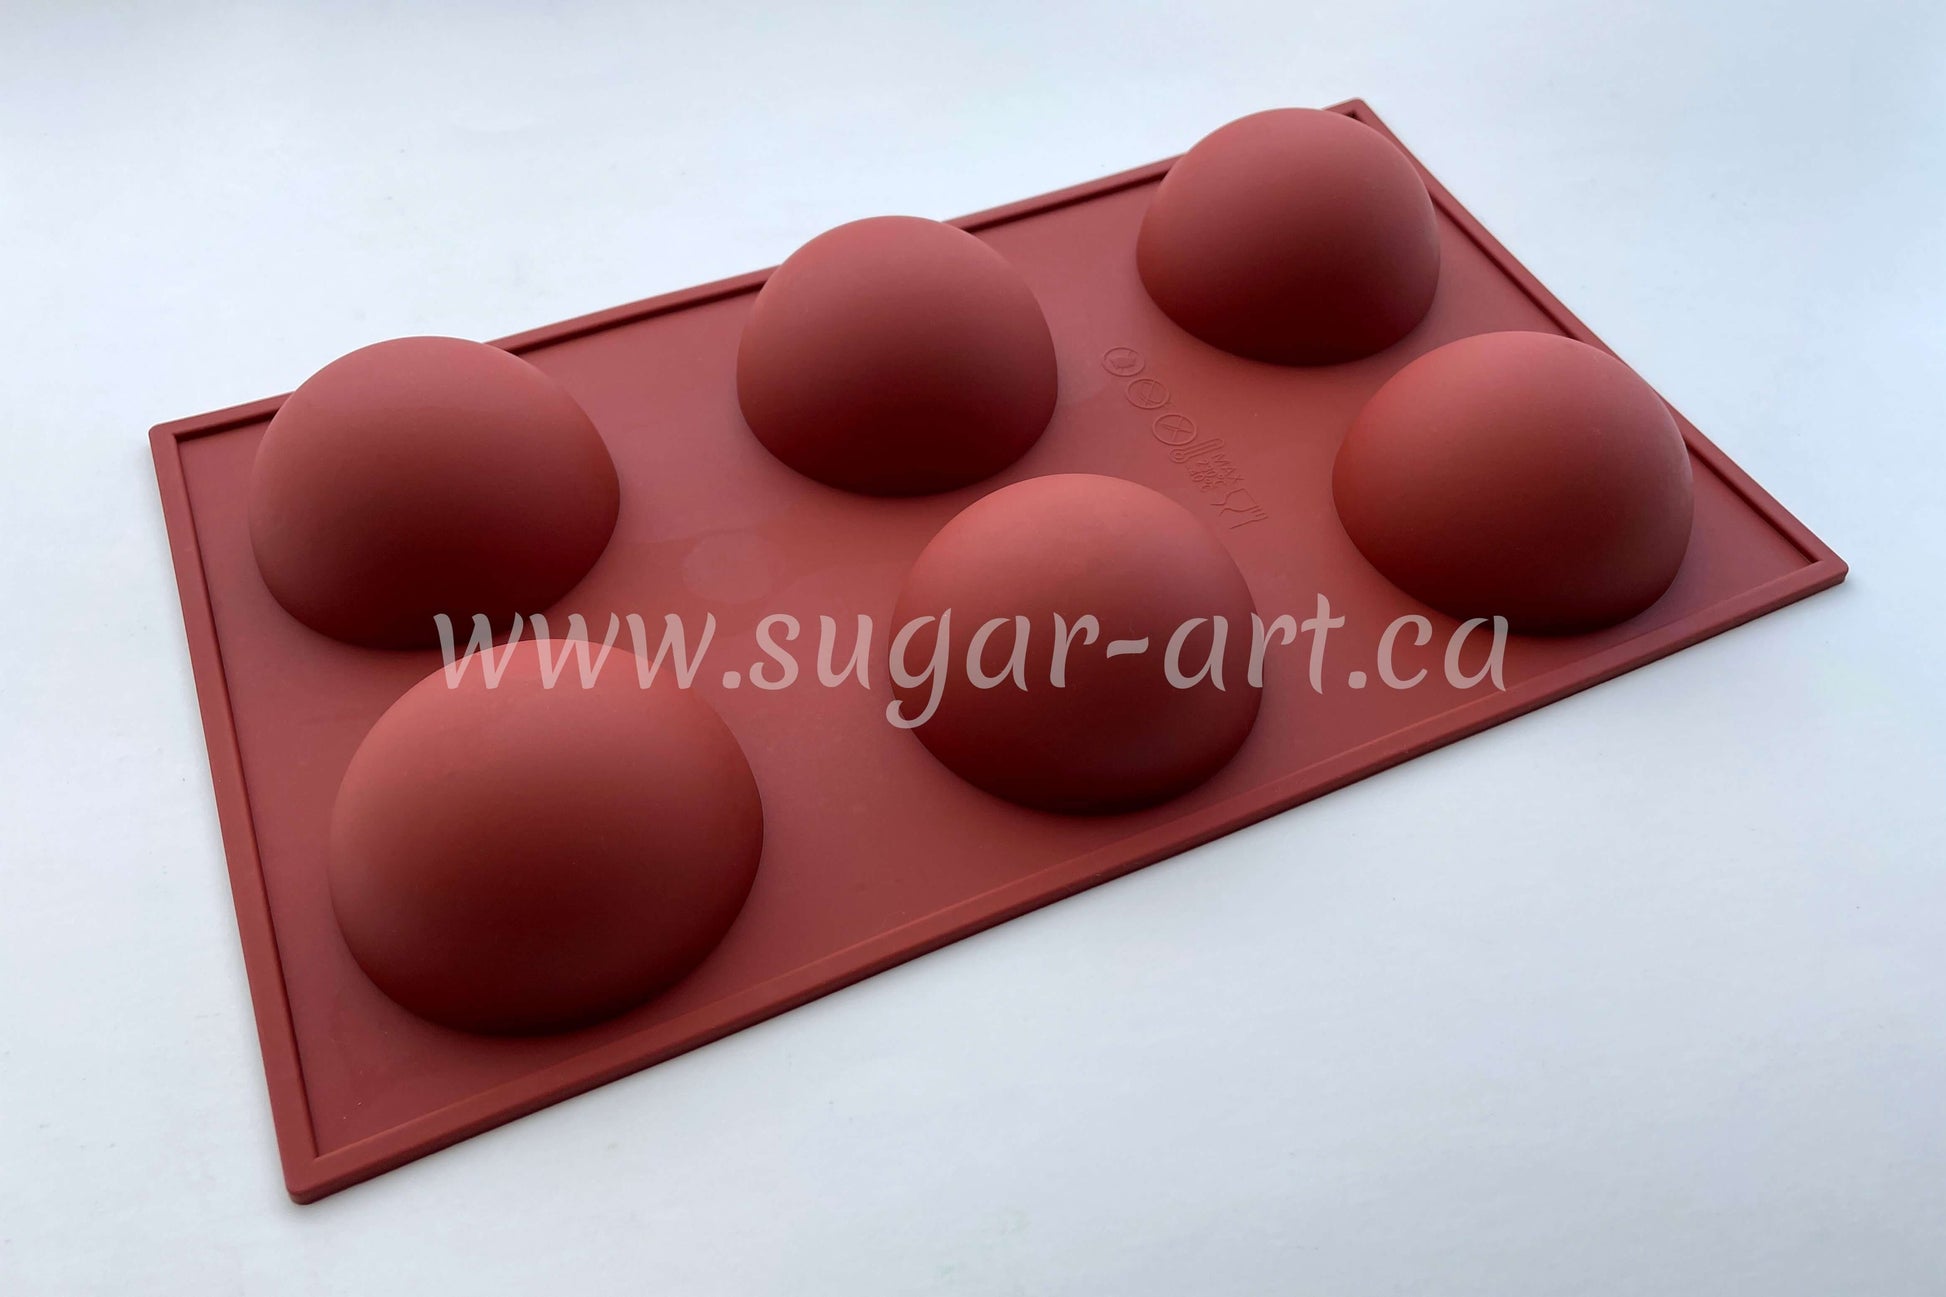 Round Silicone Molds Baking Silicone Mold Chocolate Mold Desserts Mold  Mousse Mold Ball Mold Half Ball Mold Cake Decorating Tools -  Norway